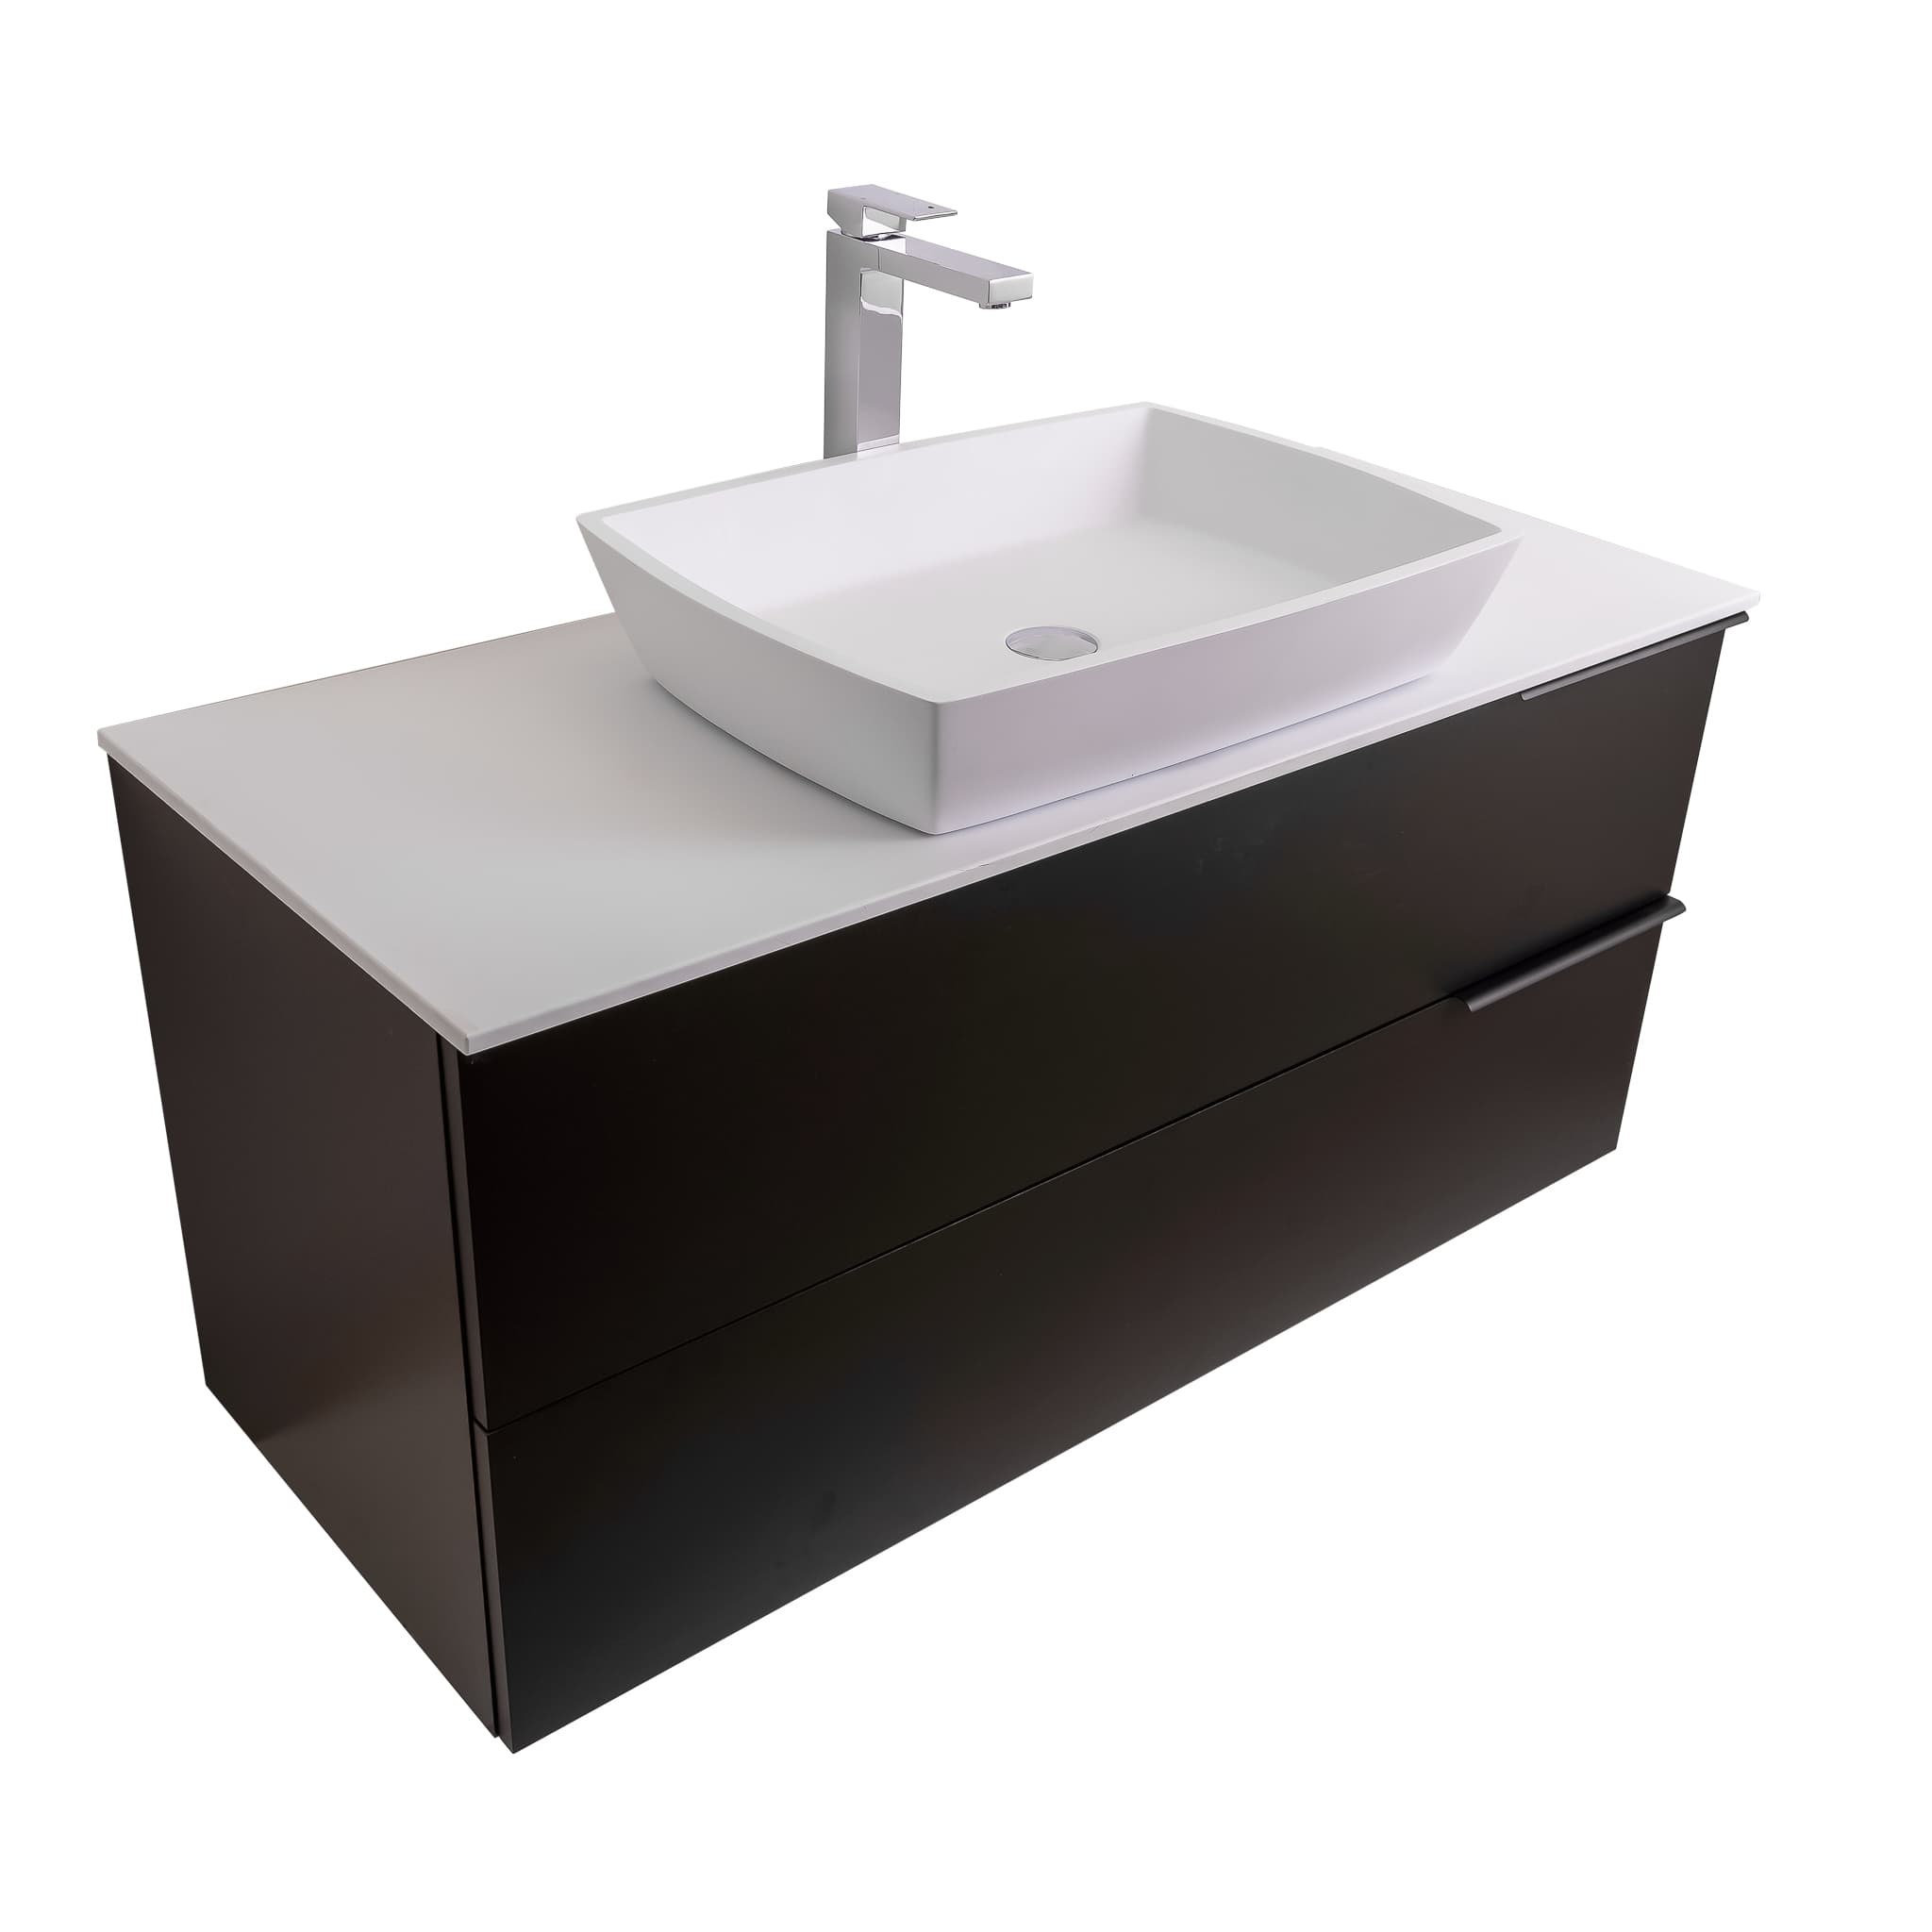 Mallorca 47.5 Matte Black Cabinet, Solid Surface Flat White Counter And Square Solid Surface White Basin 1316, Wall Mounted Modern Vanity Set